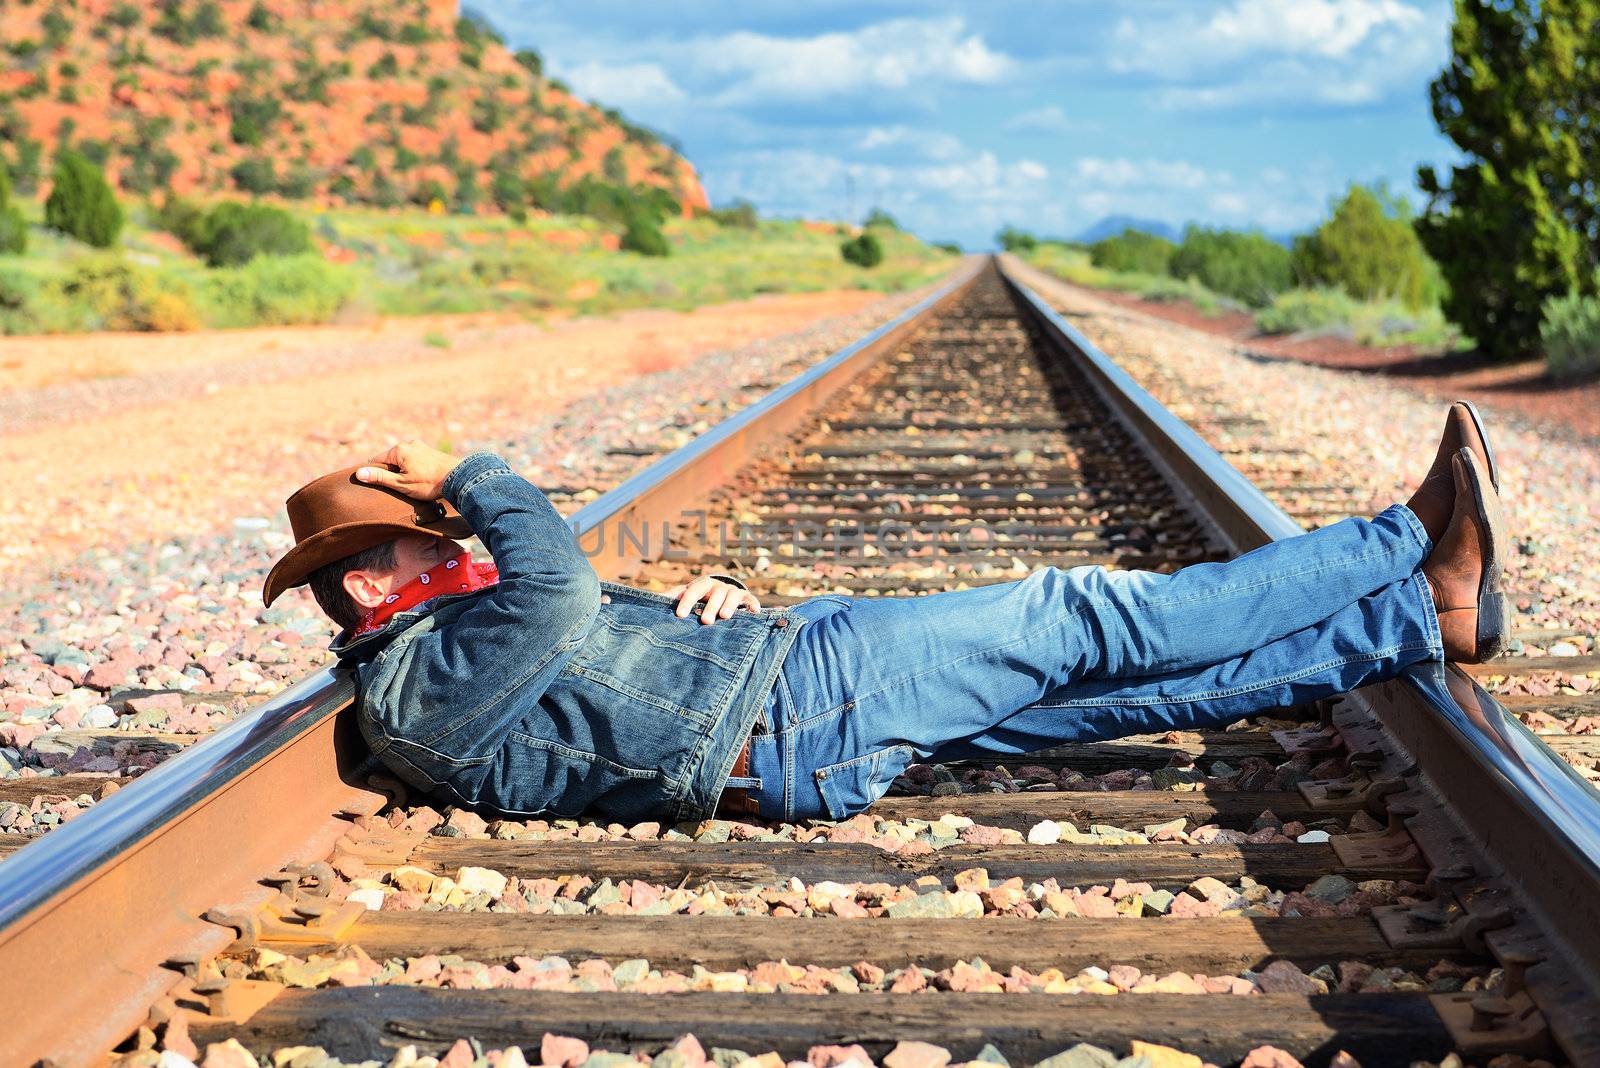 famous cow-boy boots and feets across train tracks 